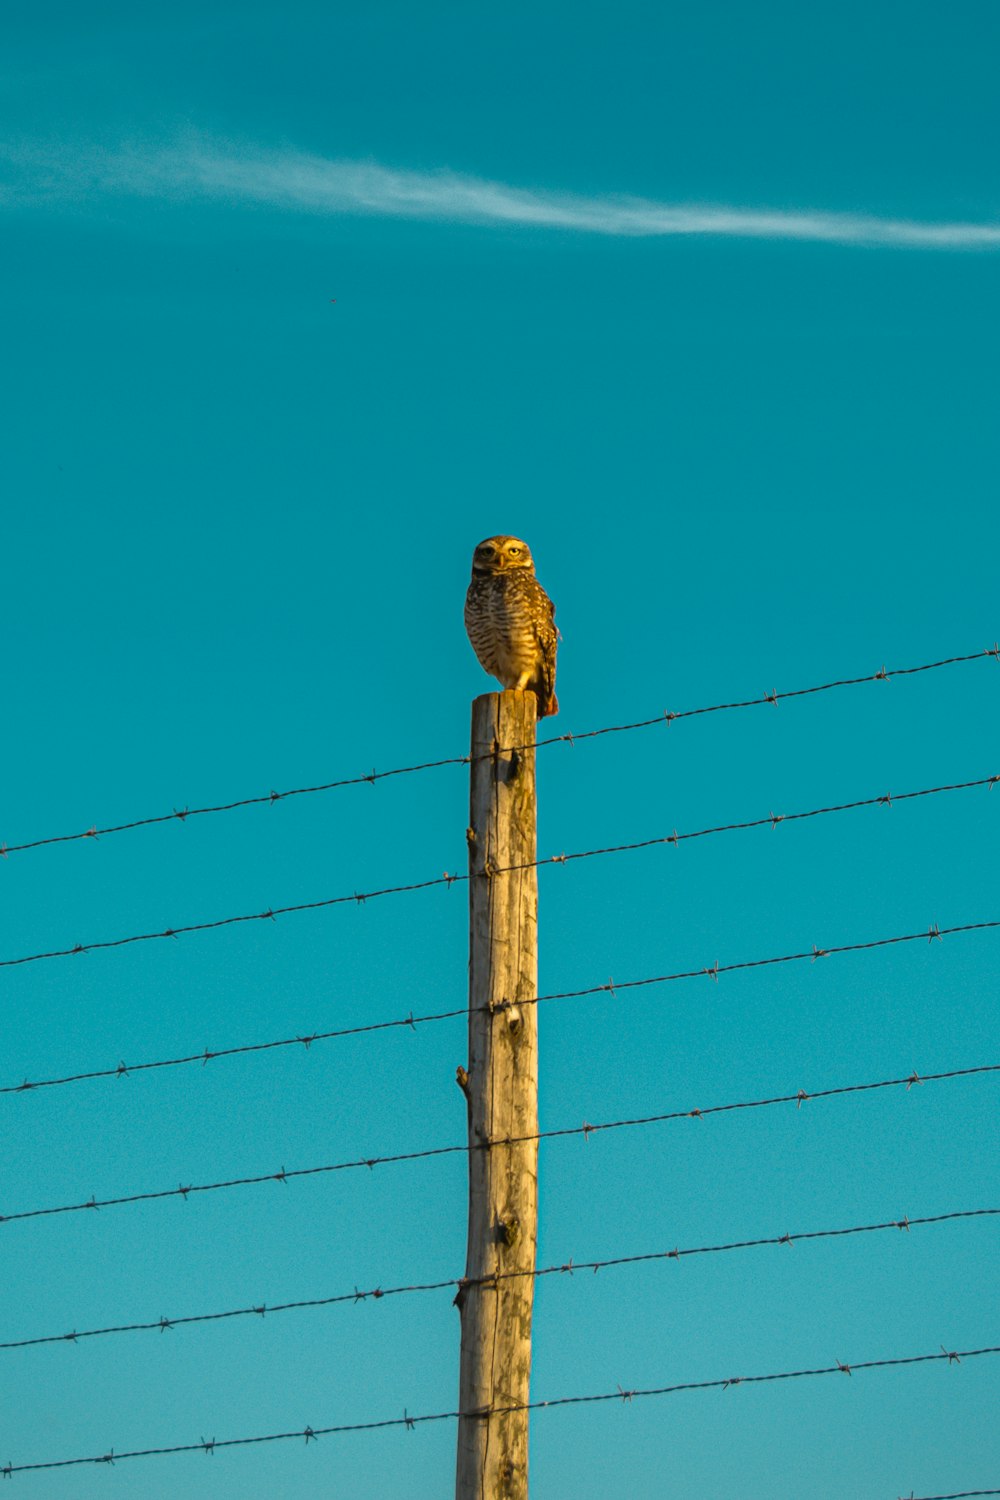 a bird perched on a power line